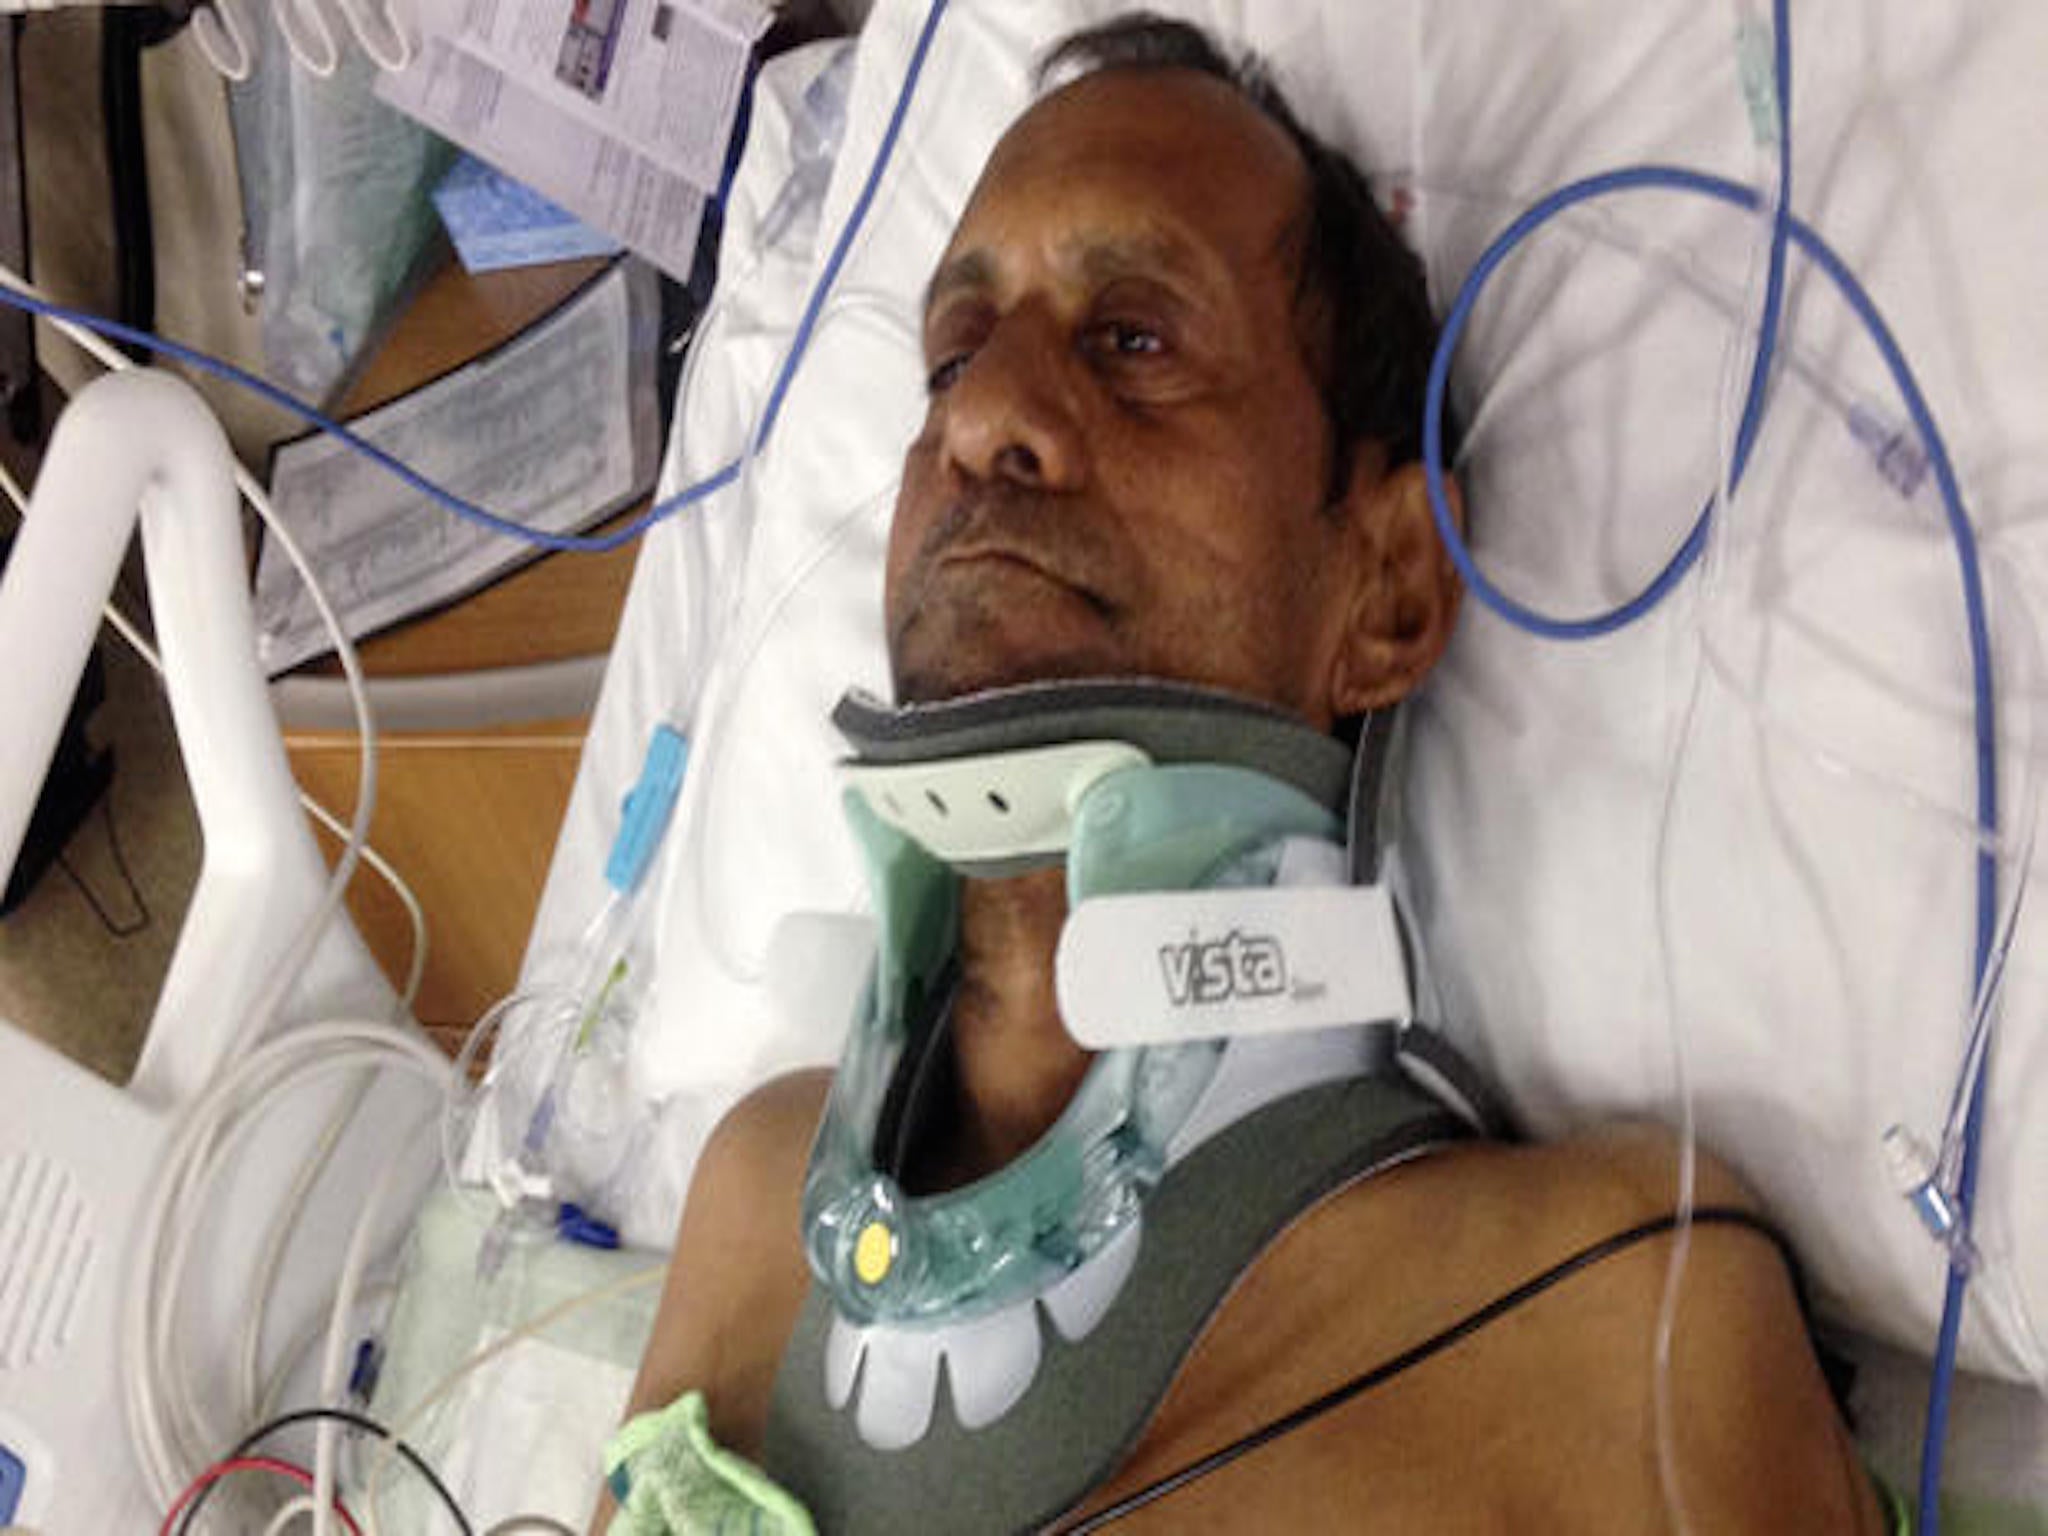 Sureshbhai Patel required surgery for damaged vertebrae after the attack